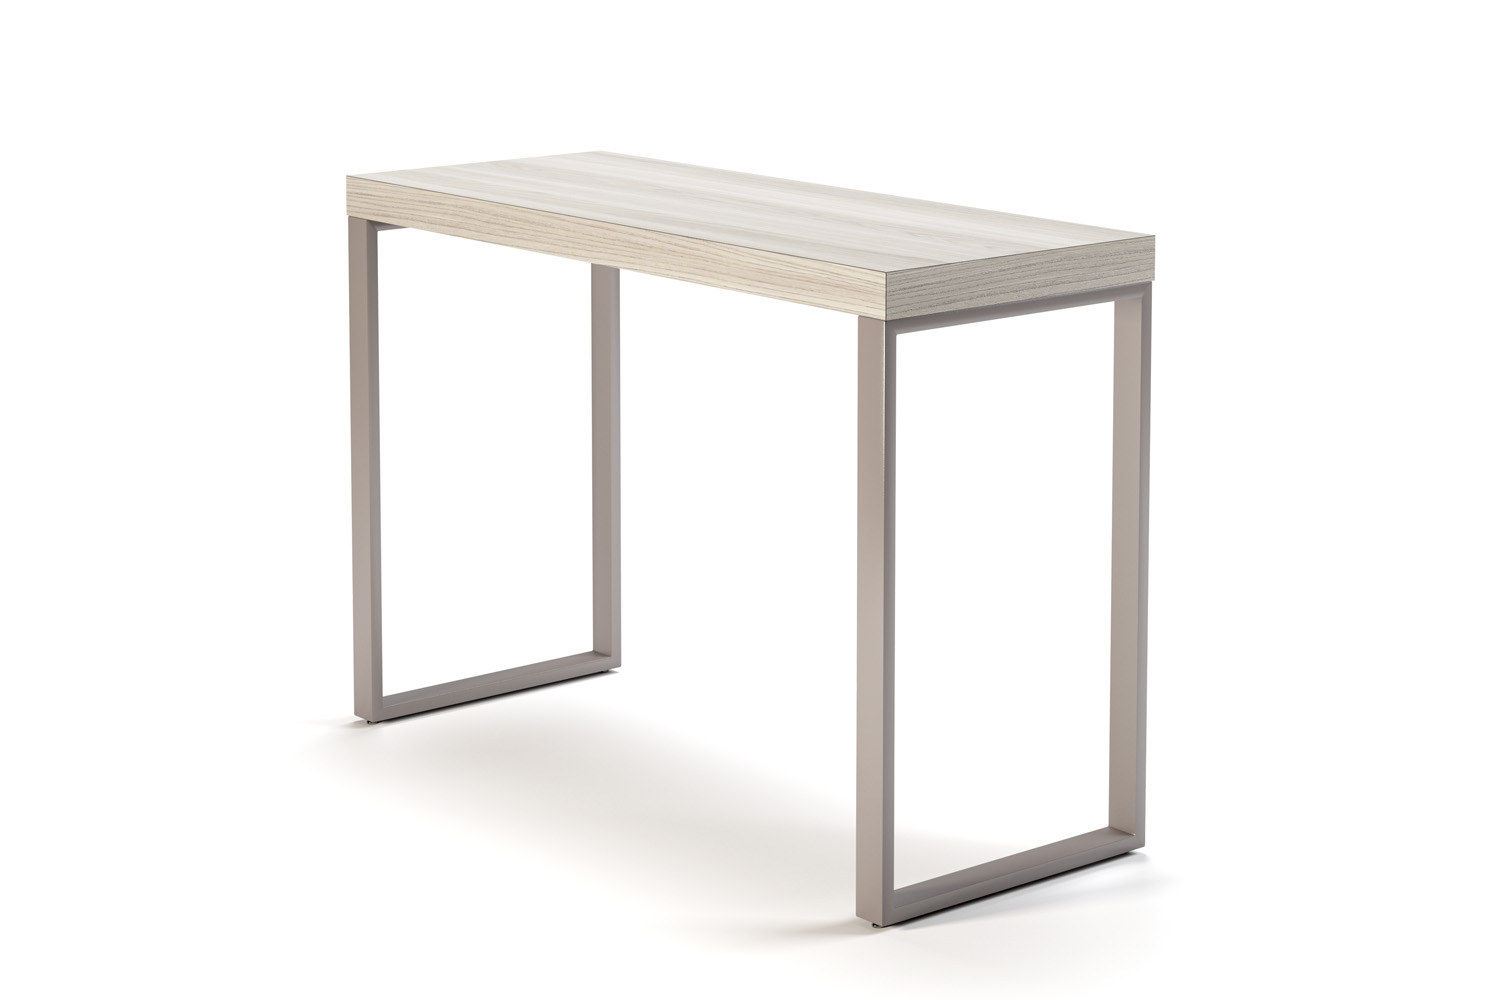 Parma 24x60 42 height table